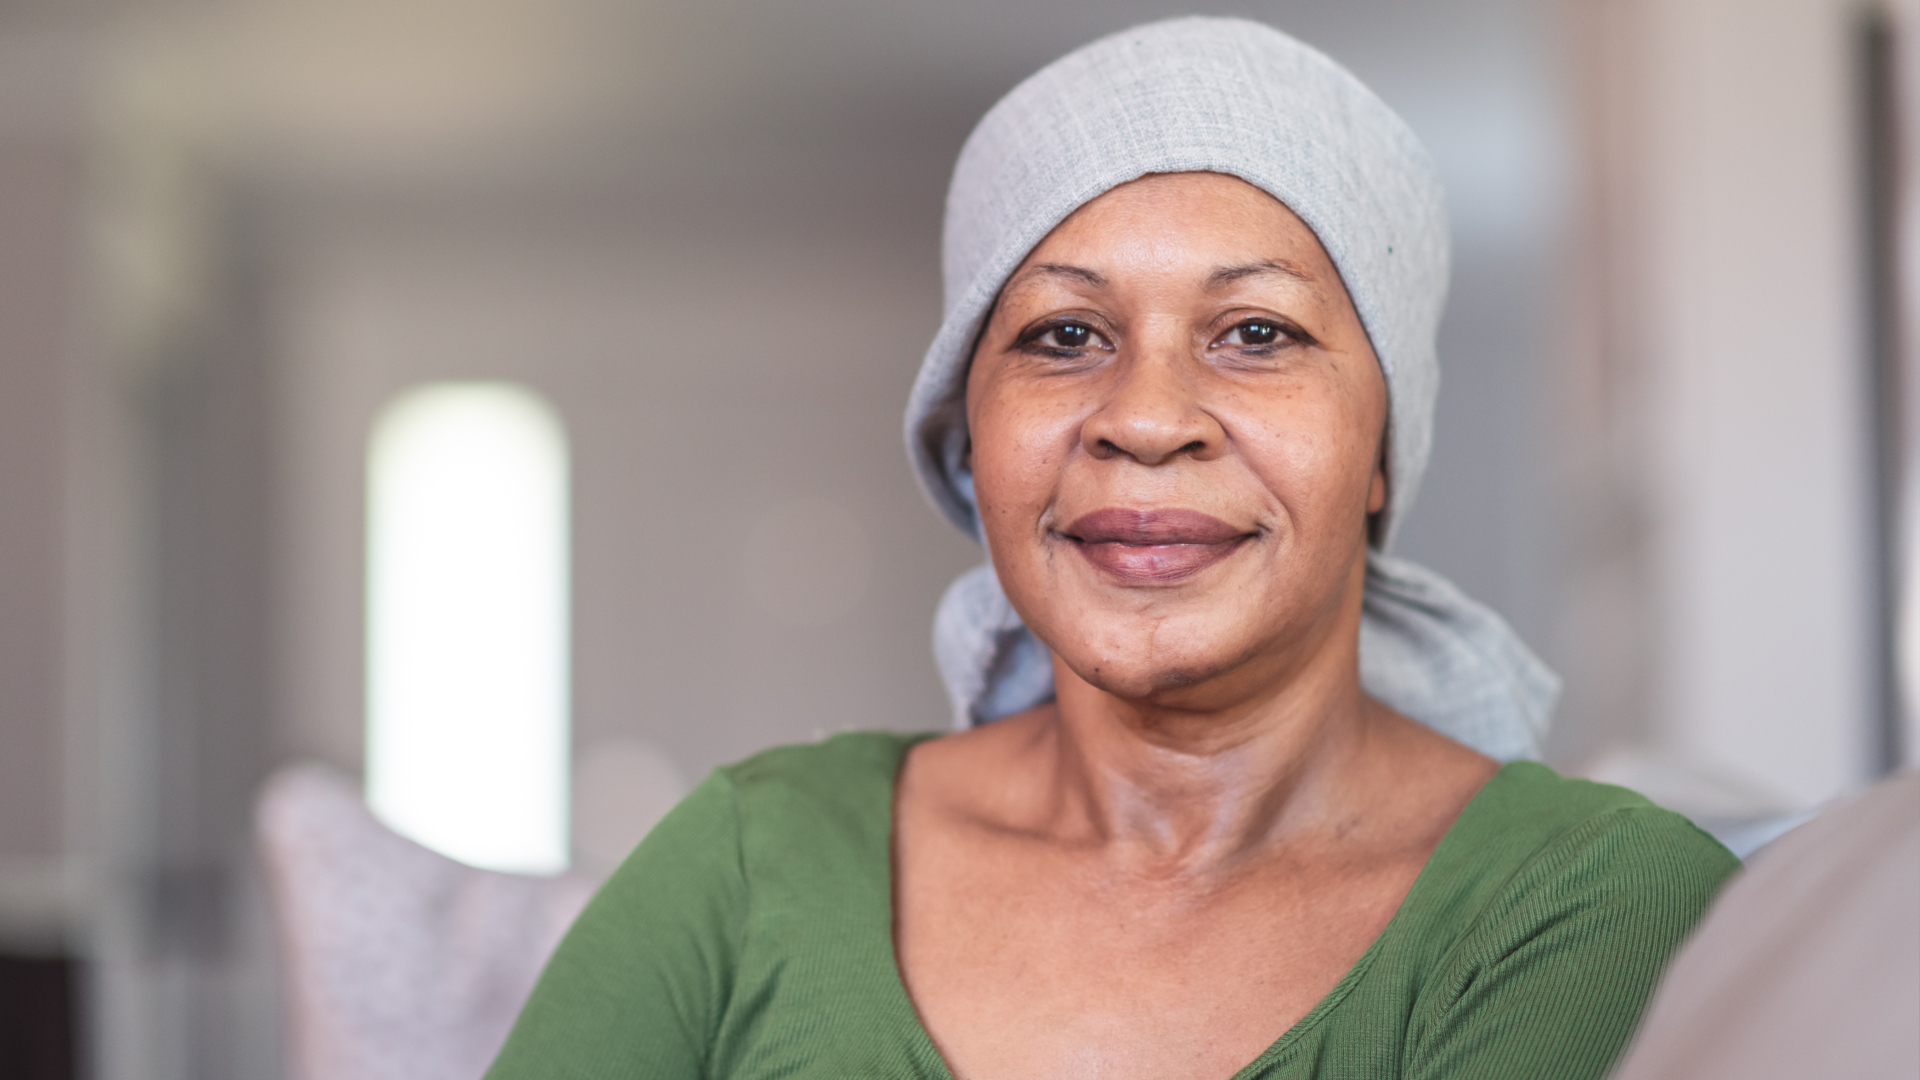 Chemo side effects can zap energy and cause pain during an already-hard time. Experts offer tips and support to help patients feel better through treatment.